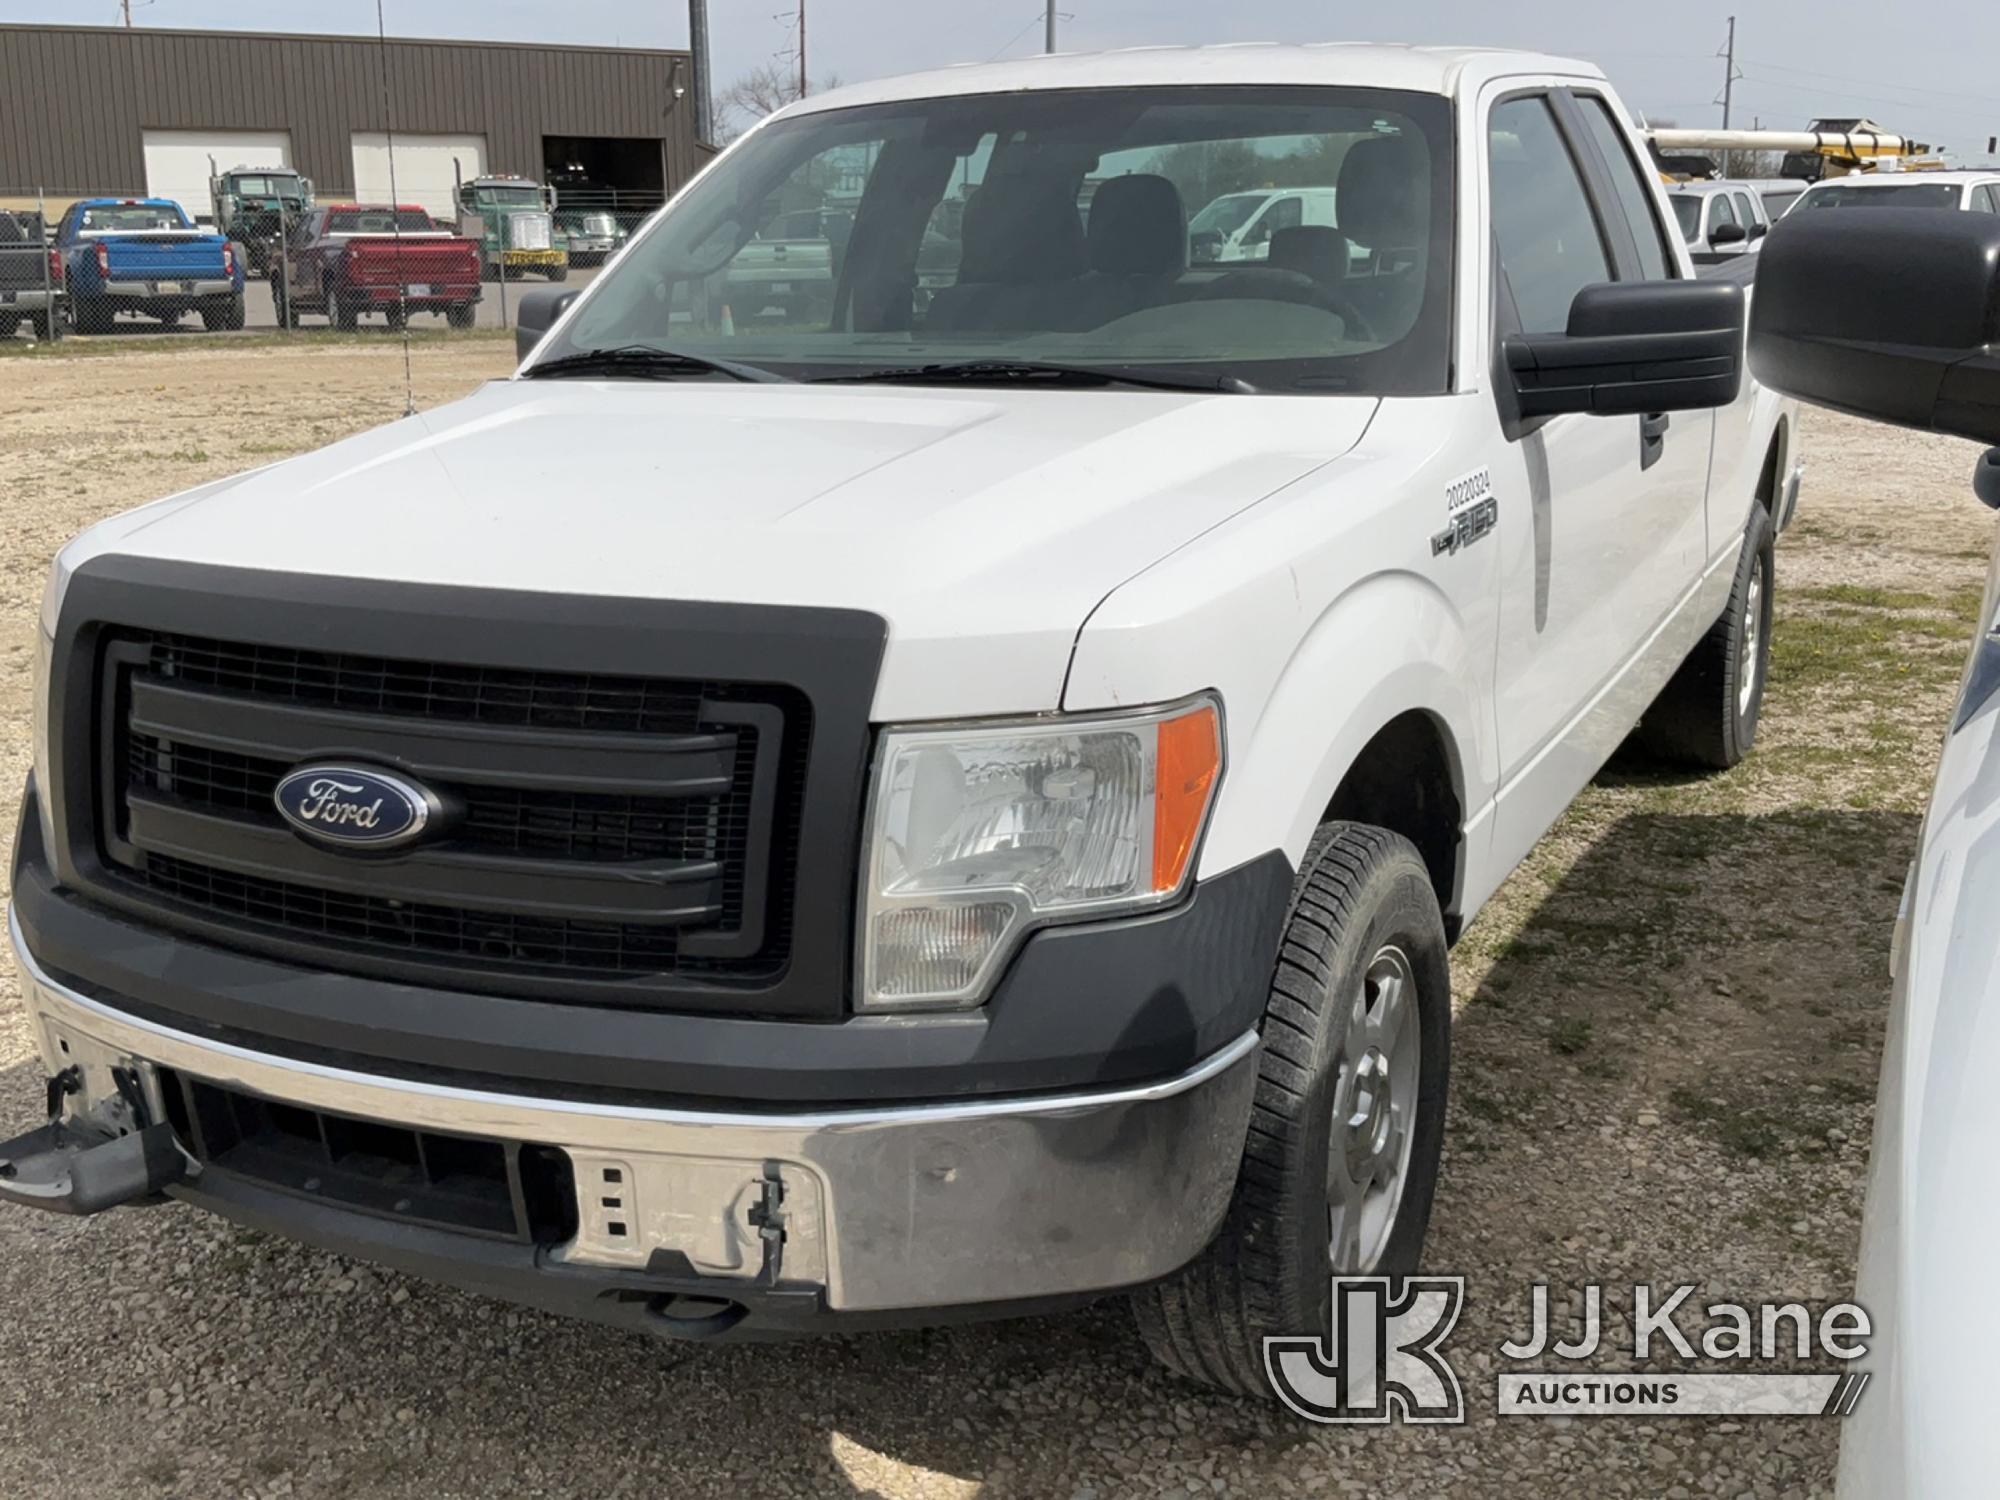 (Charlotte, MI) 2014 Ford F150 4x4 Extended-Cab Pickup Truck Starts Then Immediately Shuts Off, Will